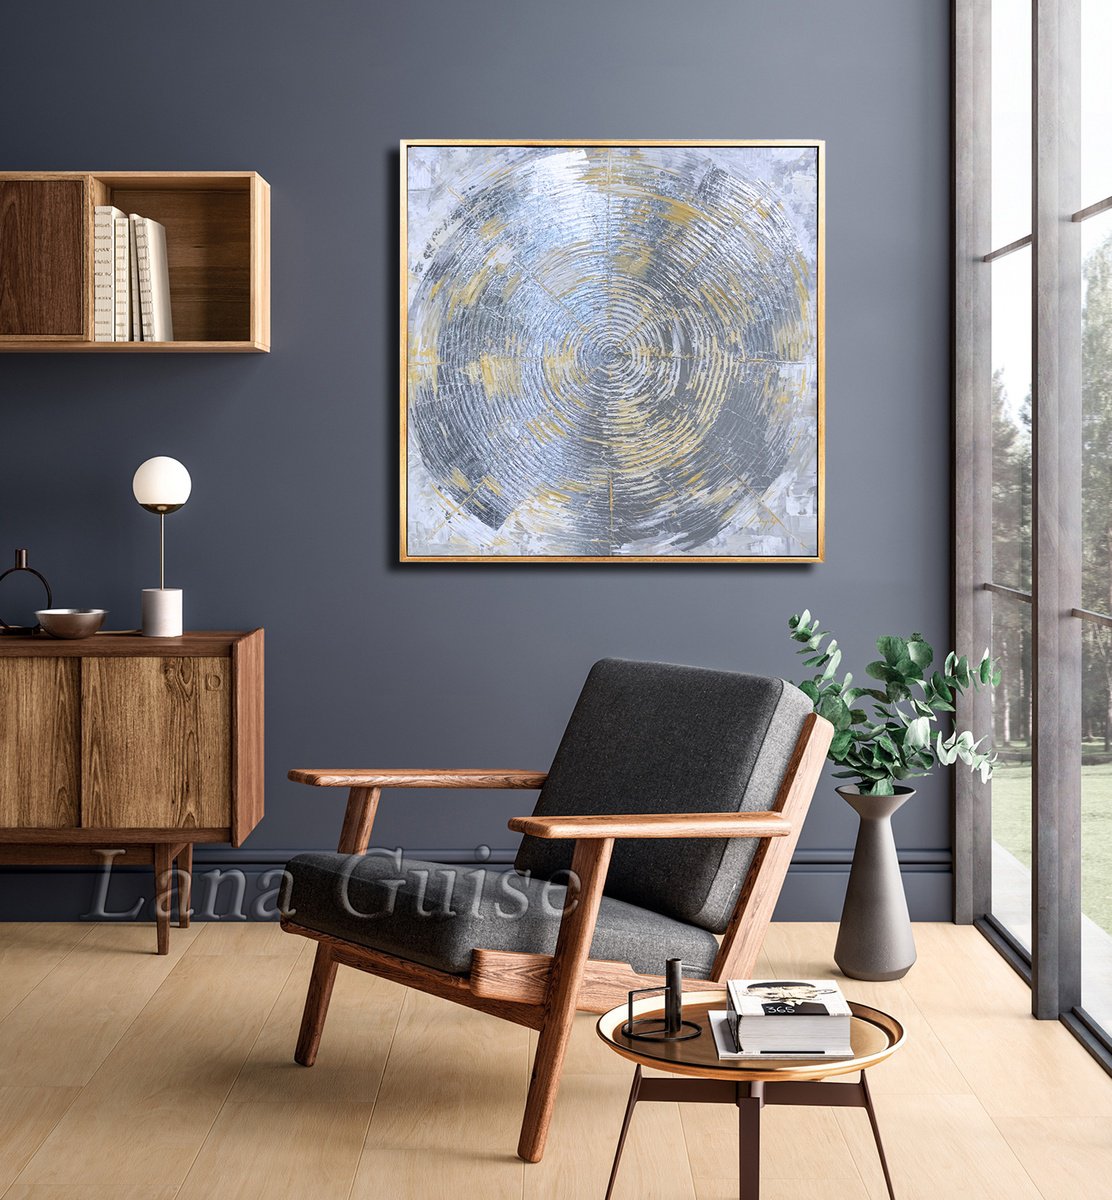 Silver Circle - Original Abstract Silver Grey Gold Large Painting, Living Room Art, Minima... by Lana Guise